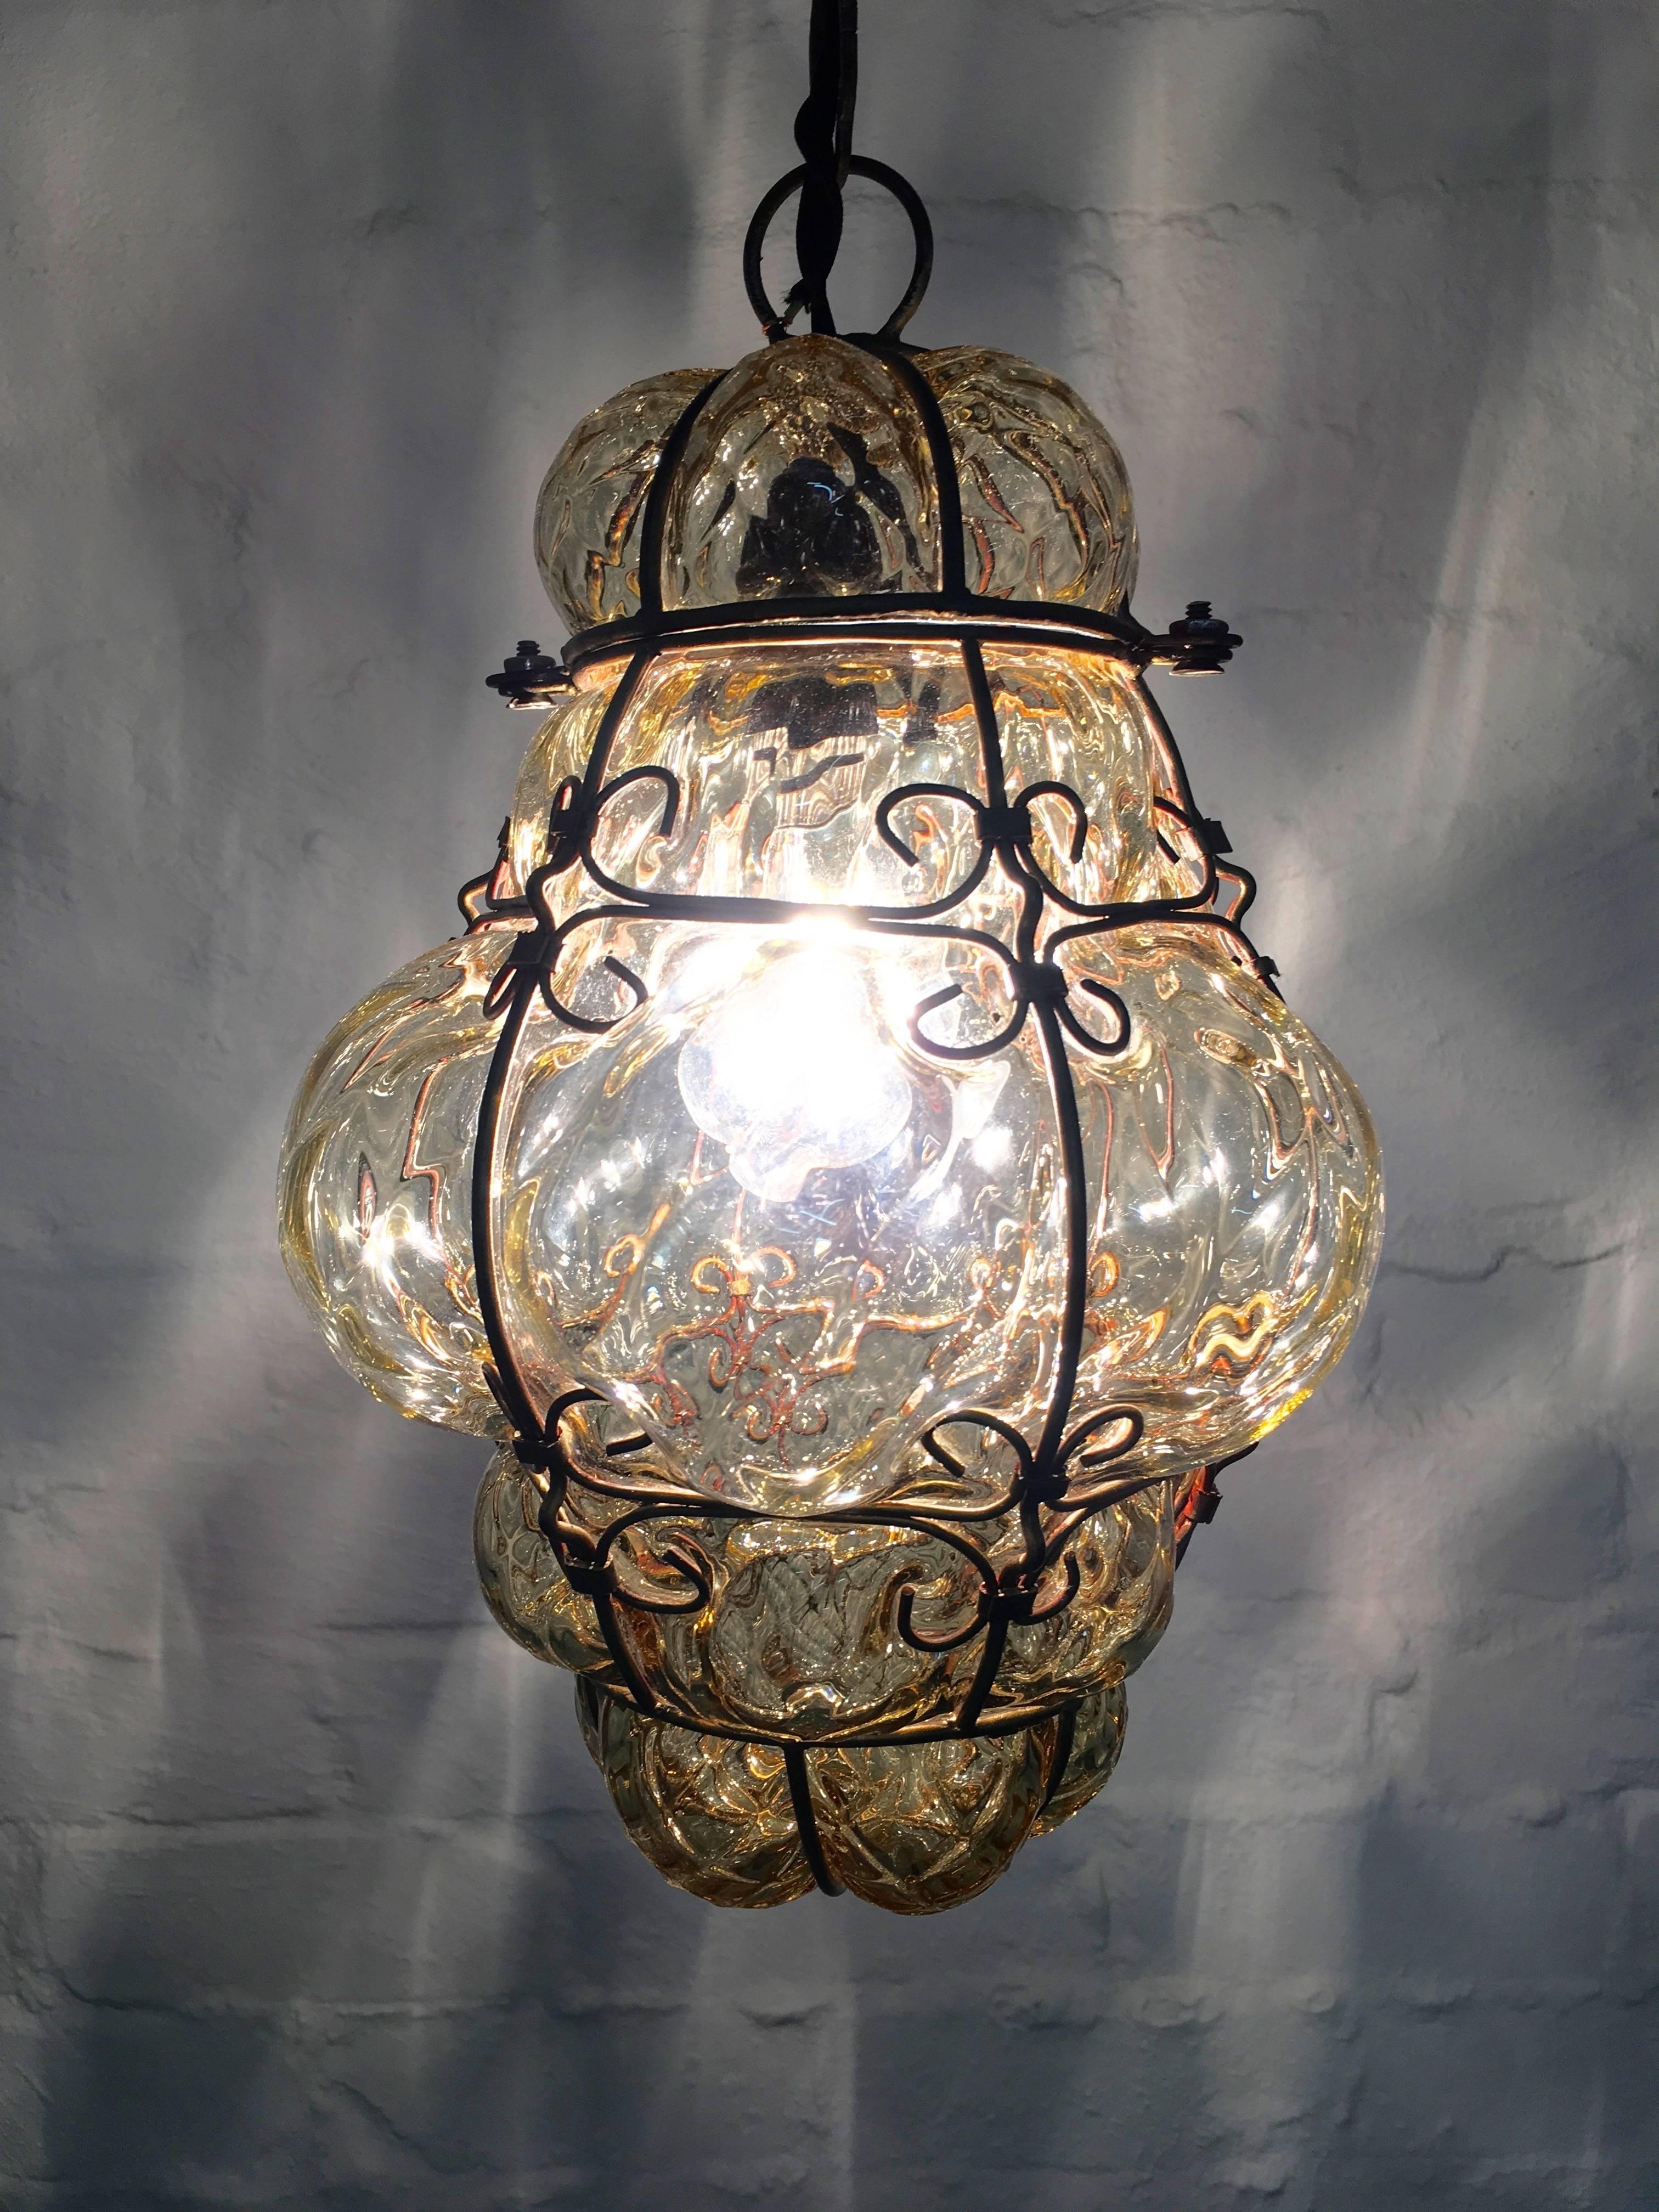 A lovely light for hallways and entrances, this handblown glass lantern attributed to Seguso, casts a beautiful fishnet pattern on surrounding surfaces. The glass is a beautiful soft bronze-gold, not amber. As always, these lovely lanterns create